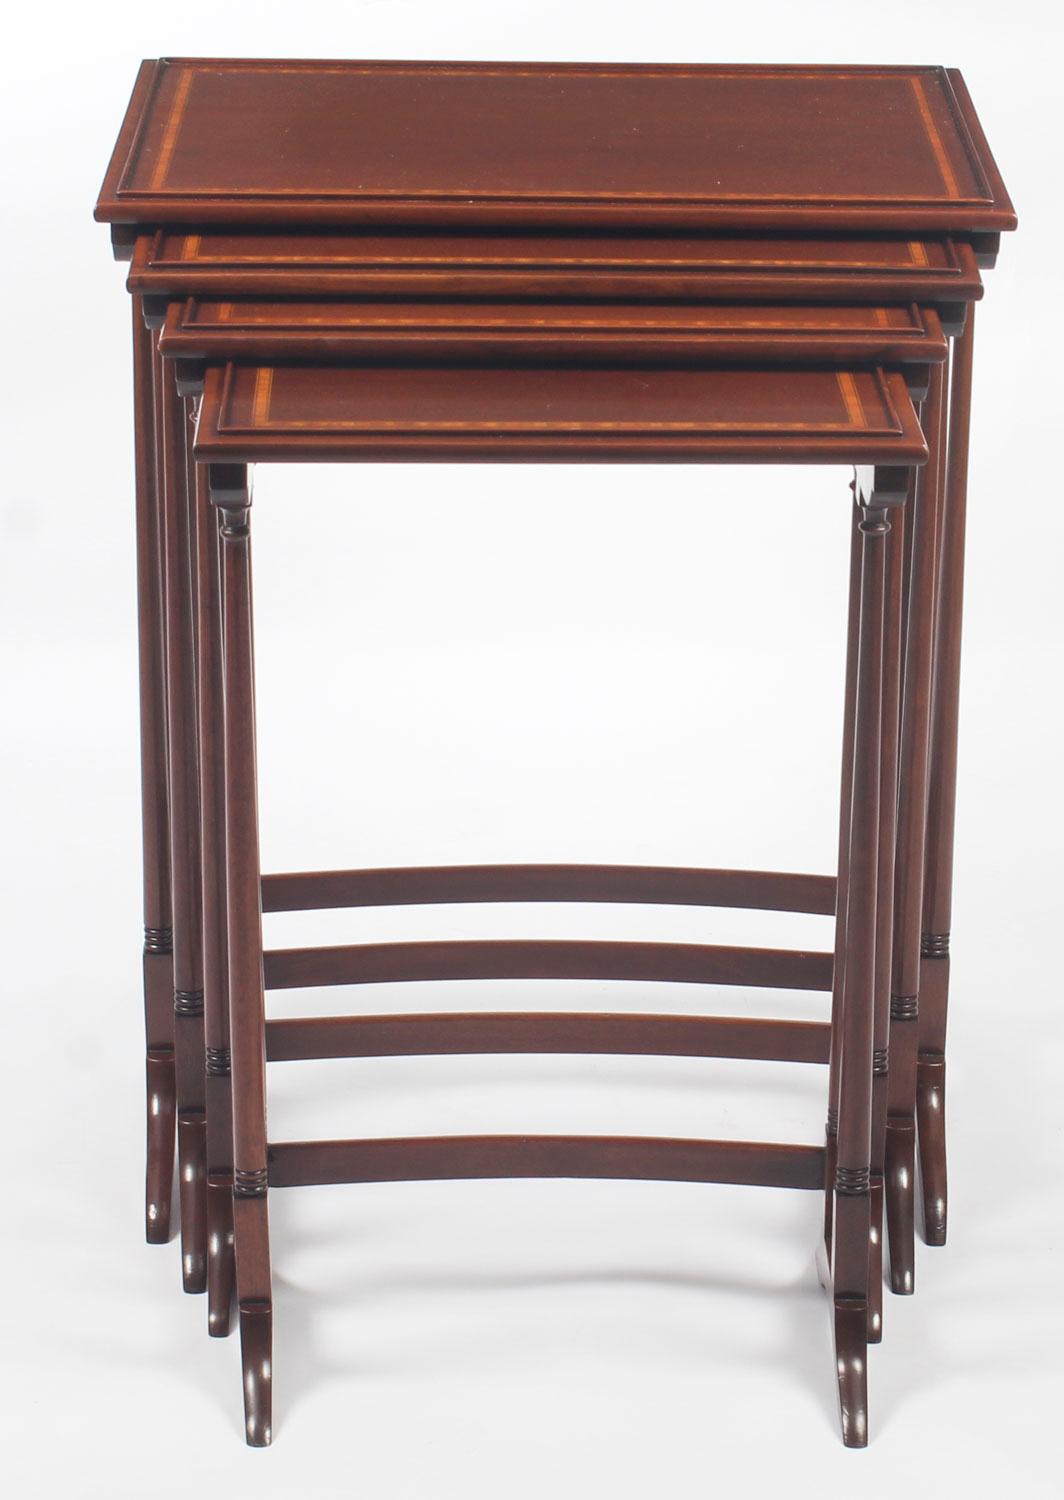 An Edwardian mahogany quartetto of tables, satinwood banded, boxwood and ebony strung. Measures: Largest width 56 cm.

This is a beautiful antique set of Edwardian mahogany quartetto tables, circa 1890 in date.

The nest consists of a set of four